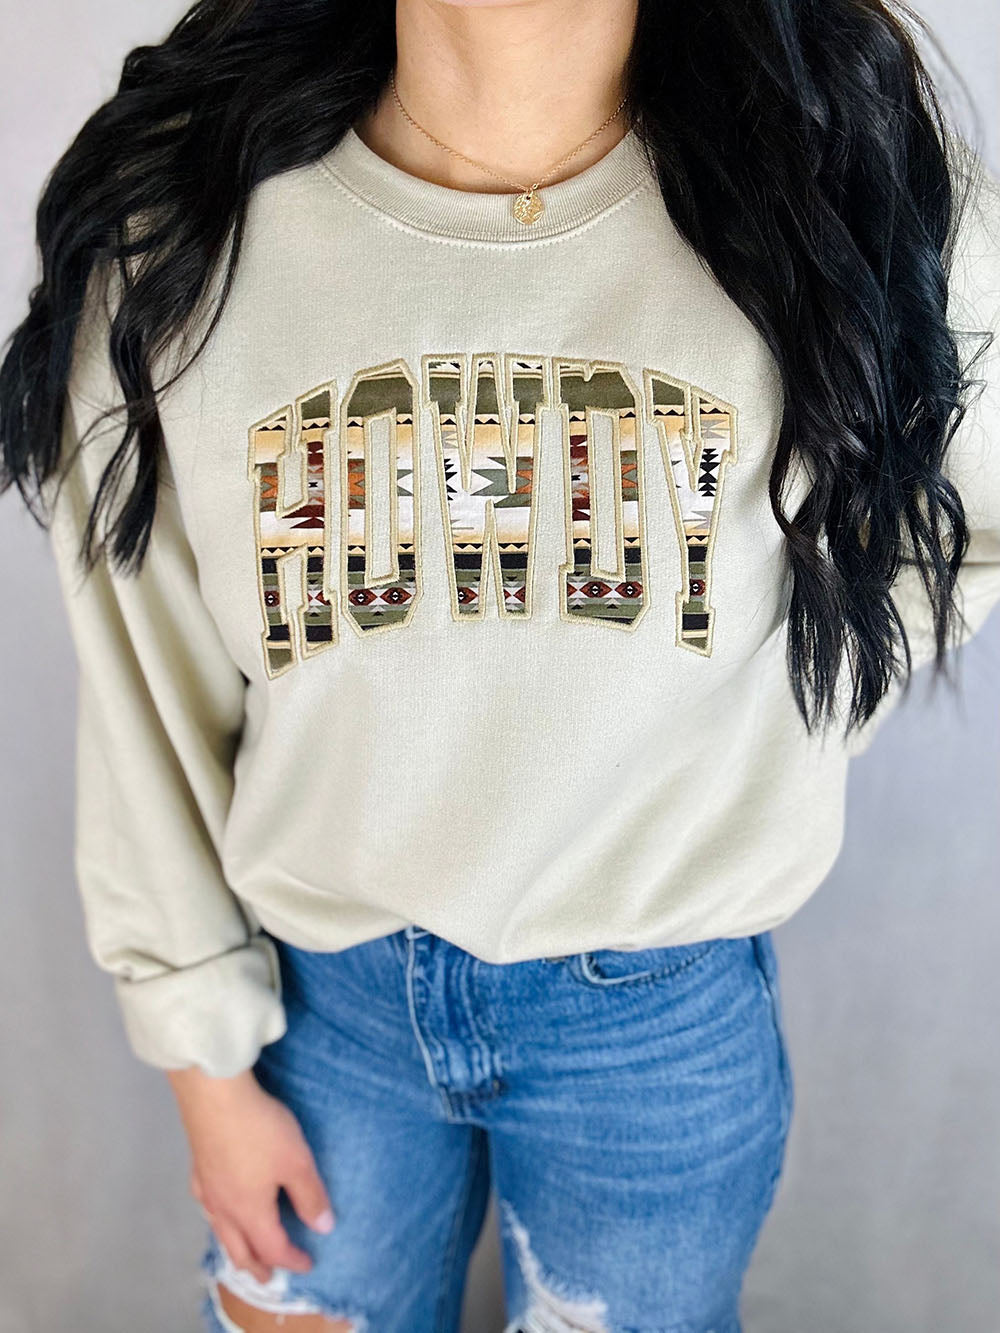 Personalized Embroidered Southwestern Aztec Howdy Sweatshirt Hoodie